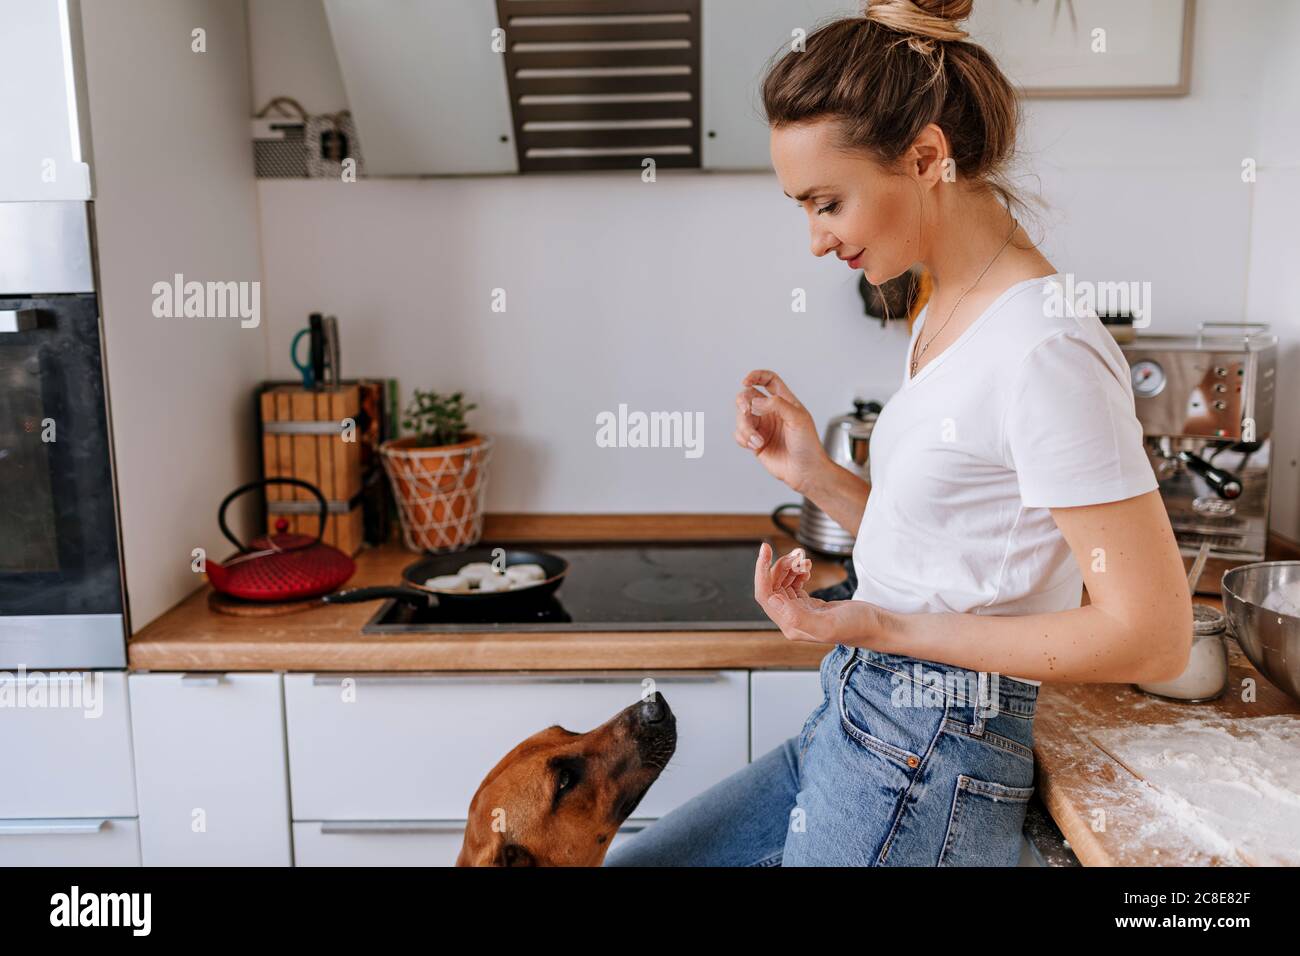 Beautiful woman with messy hands looking at dog while standing in kitchen Stock Photo